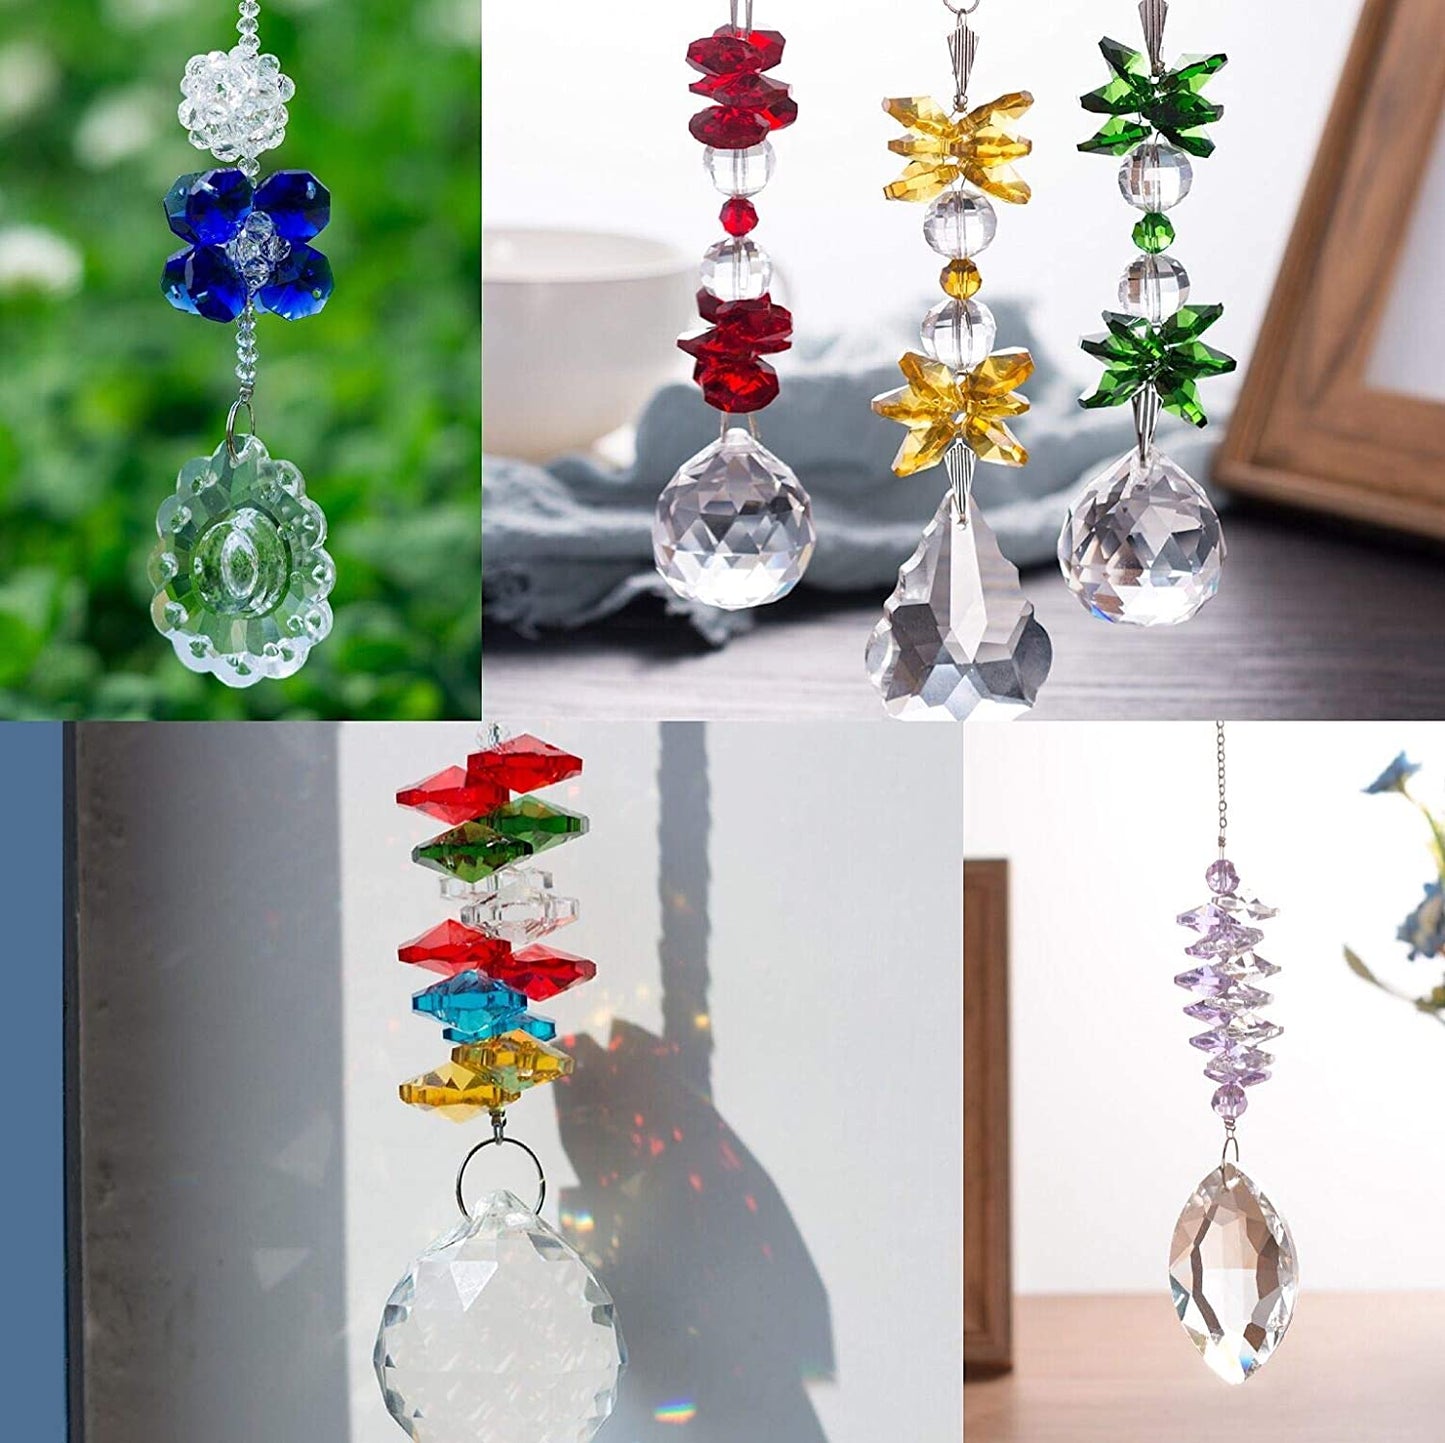 Colorful Glass Octagon Beads for Chandelier (100 pcs)